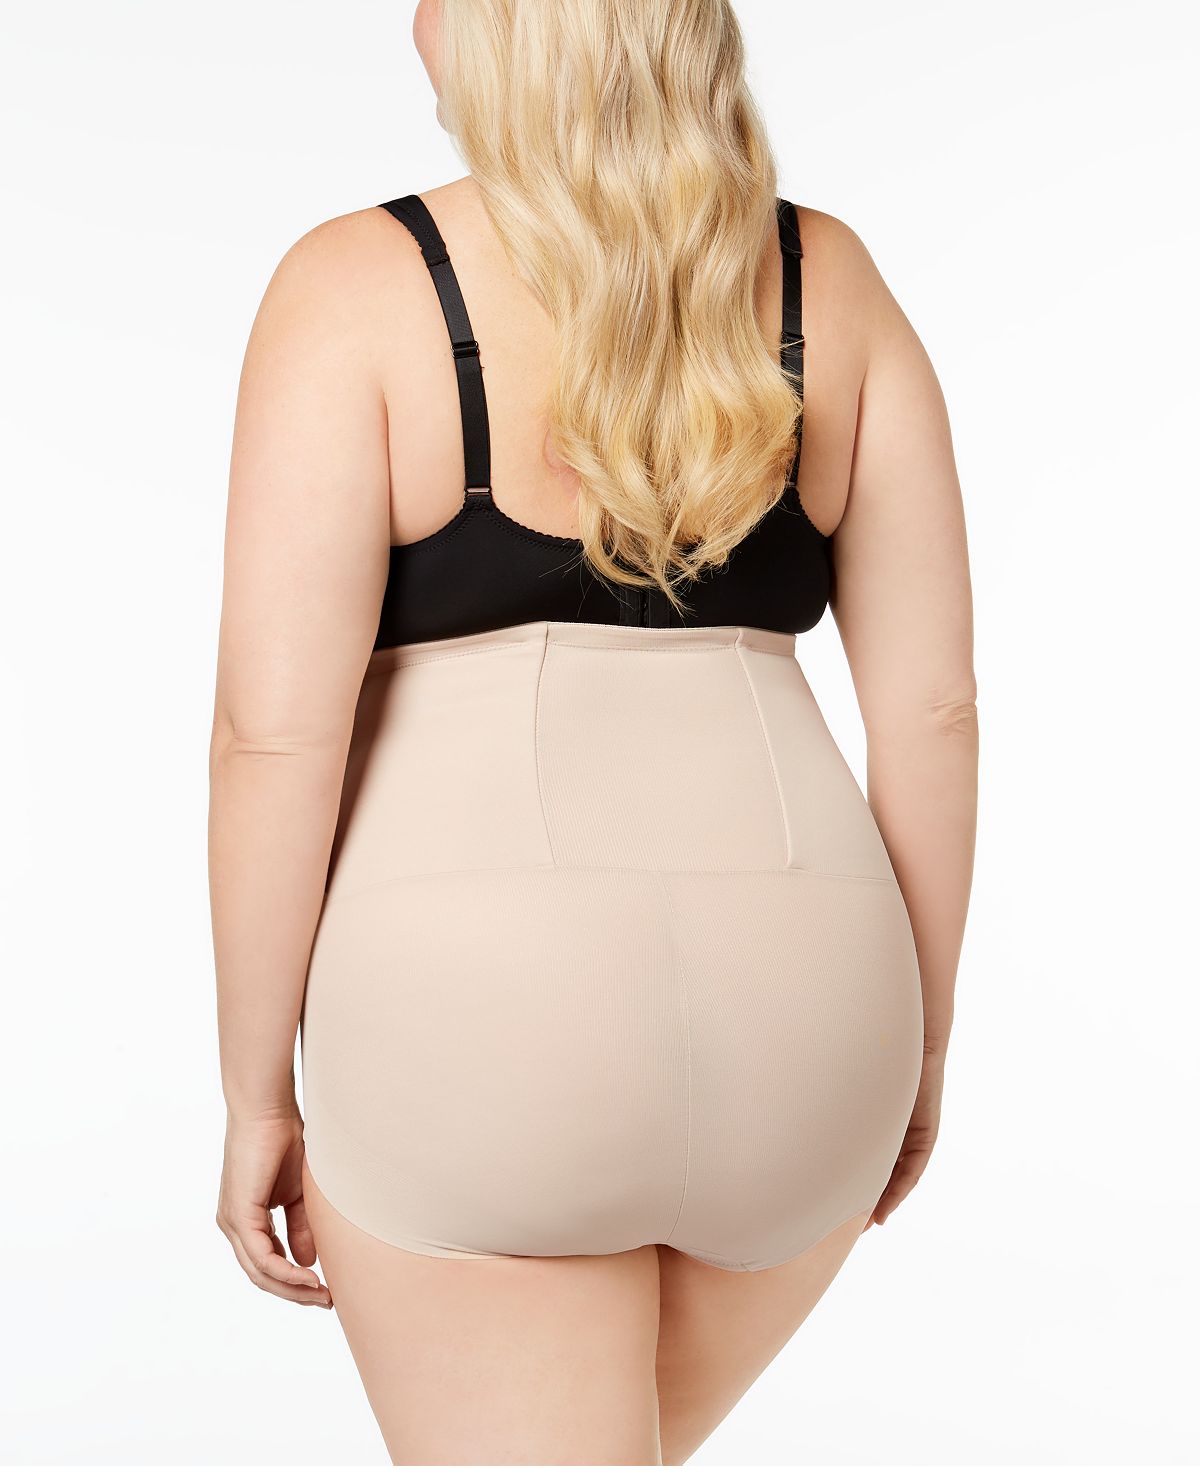 Miraclesuit Wo Extra Firm Tummy-control Inches Off Waist Cinching High-waist Brief 2724 Nude- Nude 01